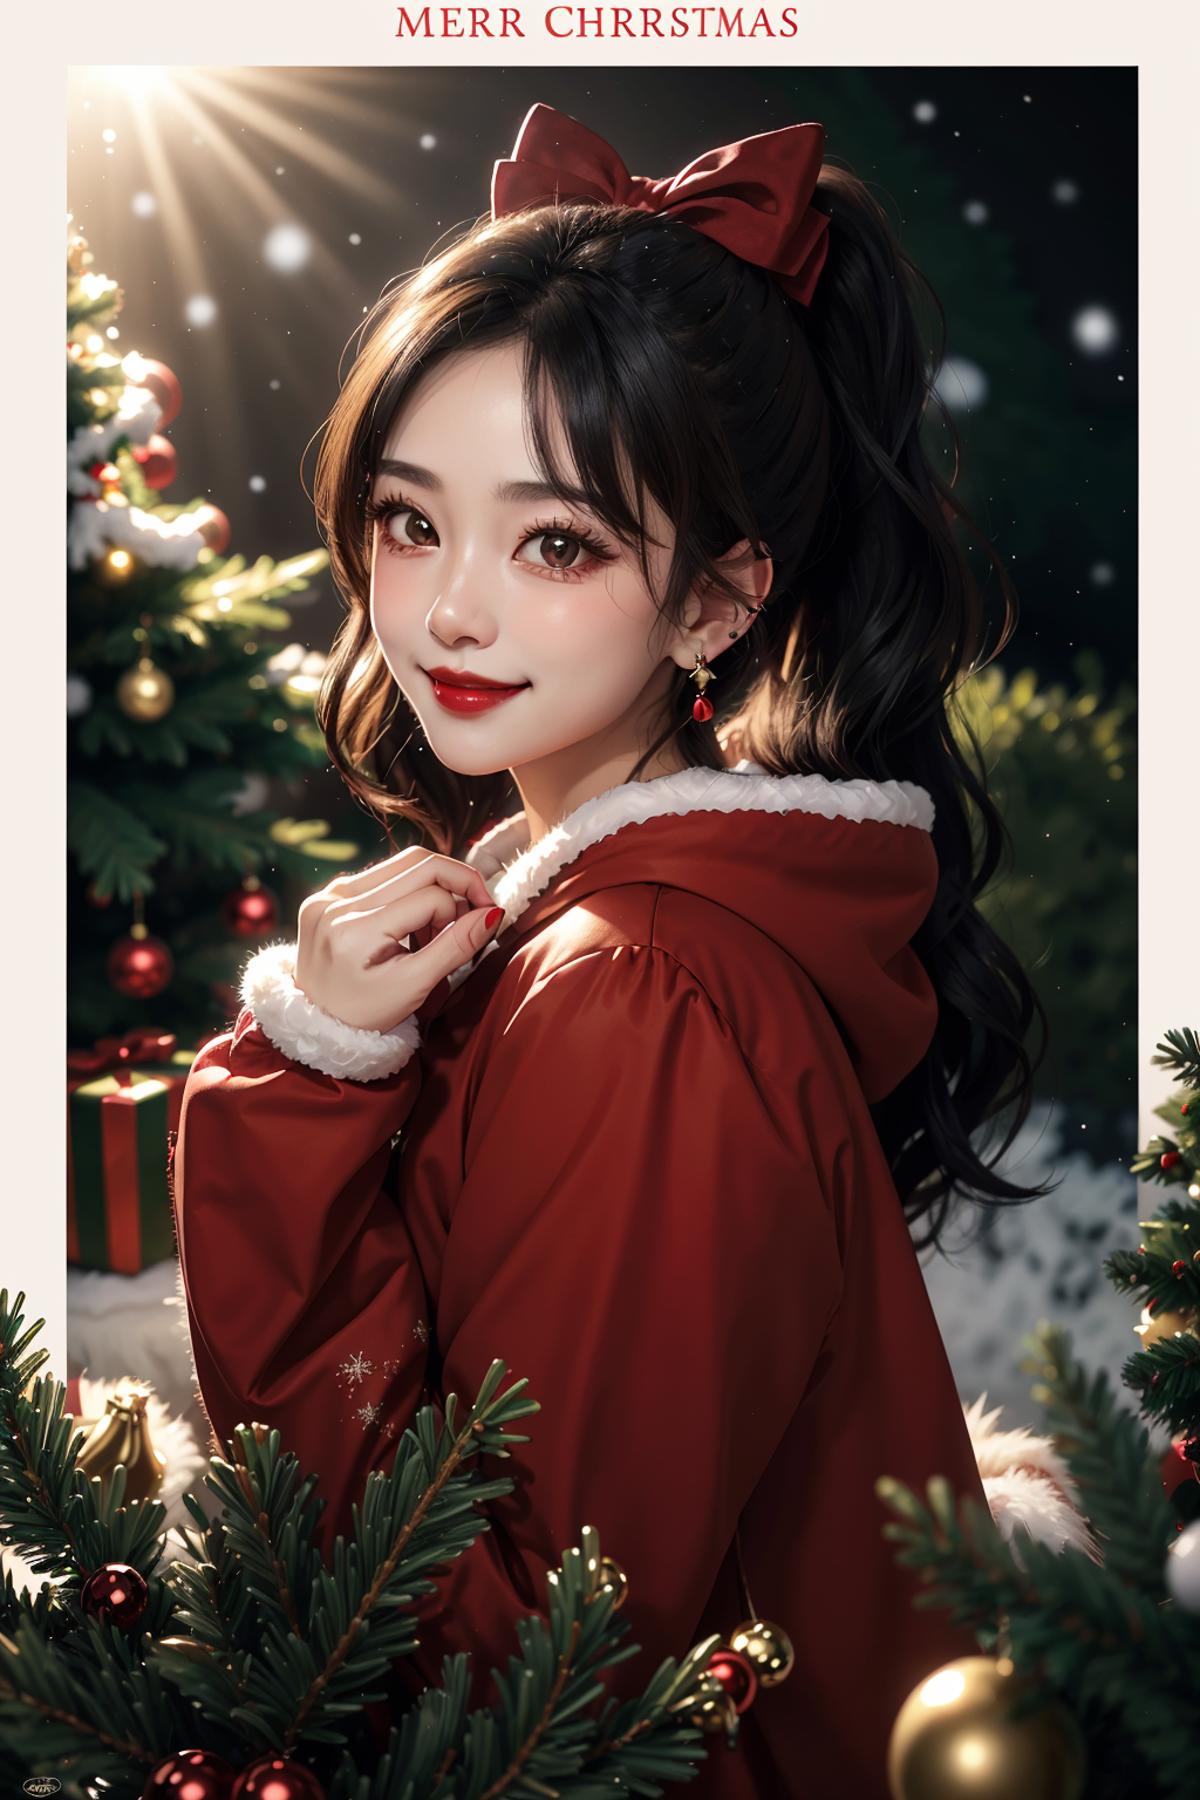 Christmas girl image by laolong_eth